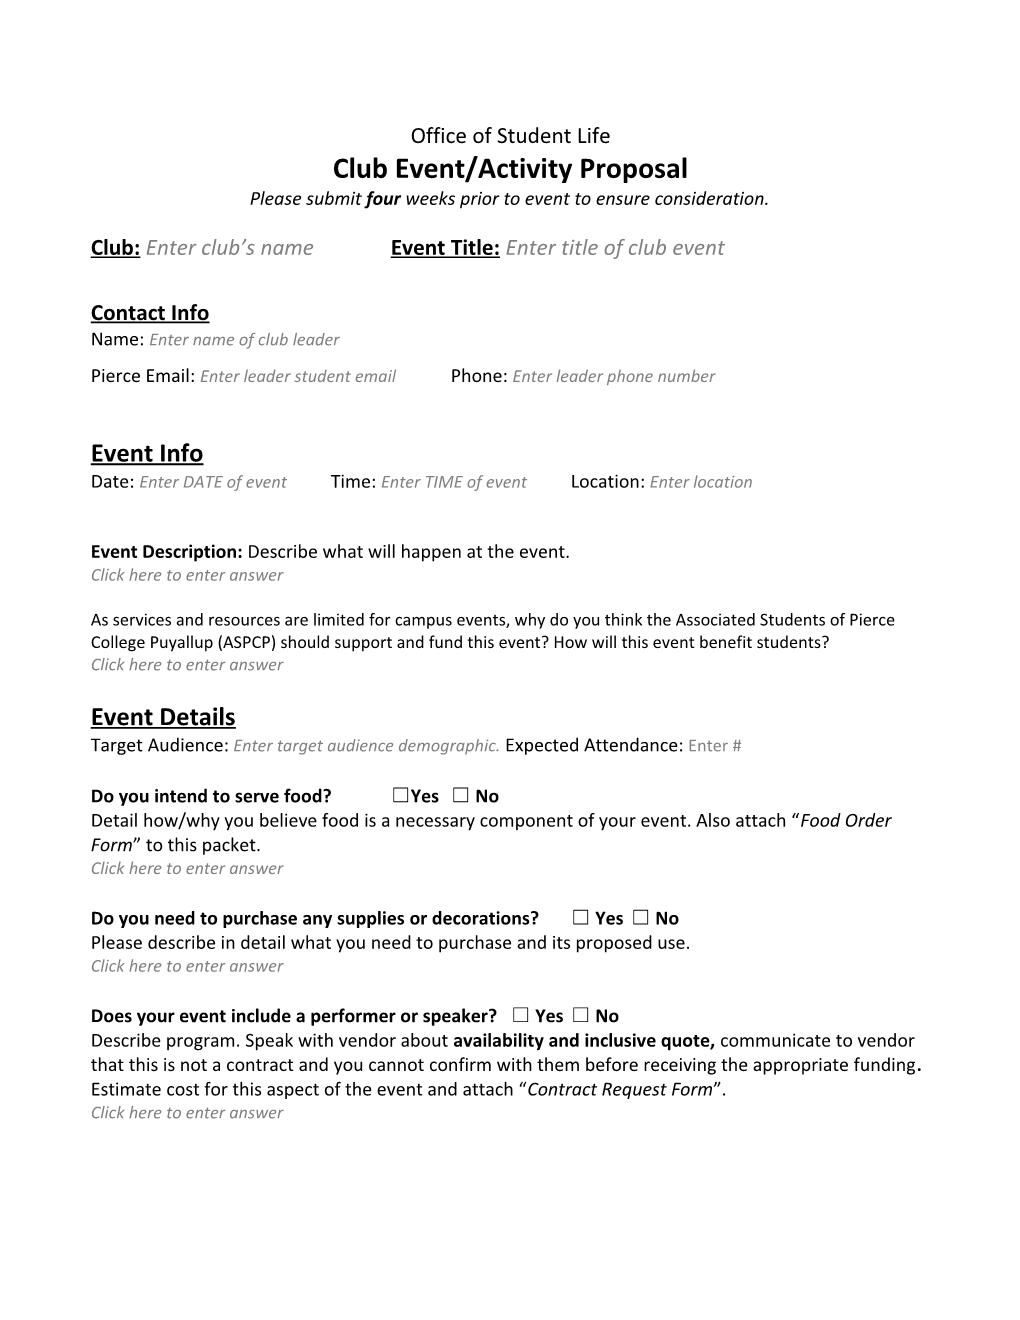 Club Event/Activity Proposal